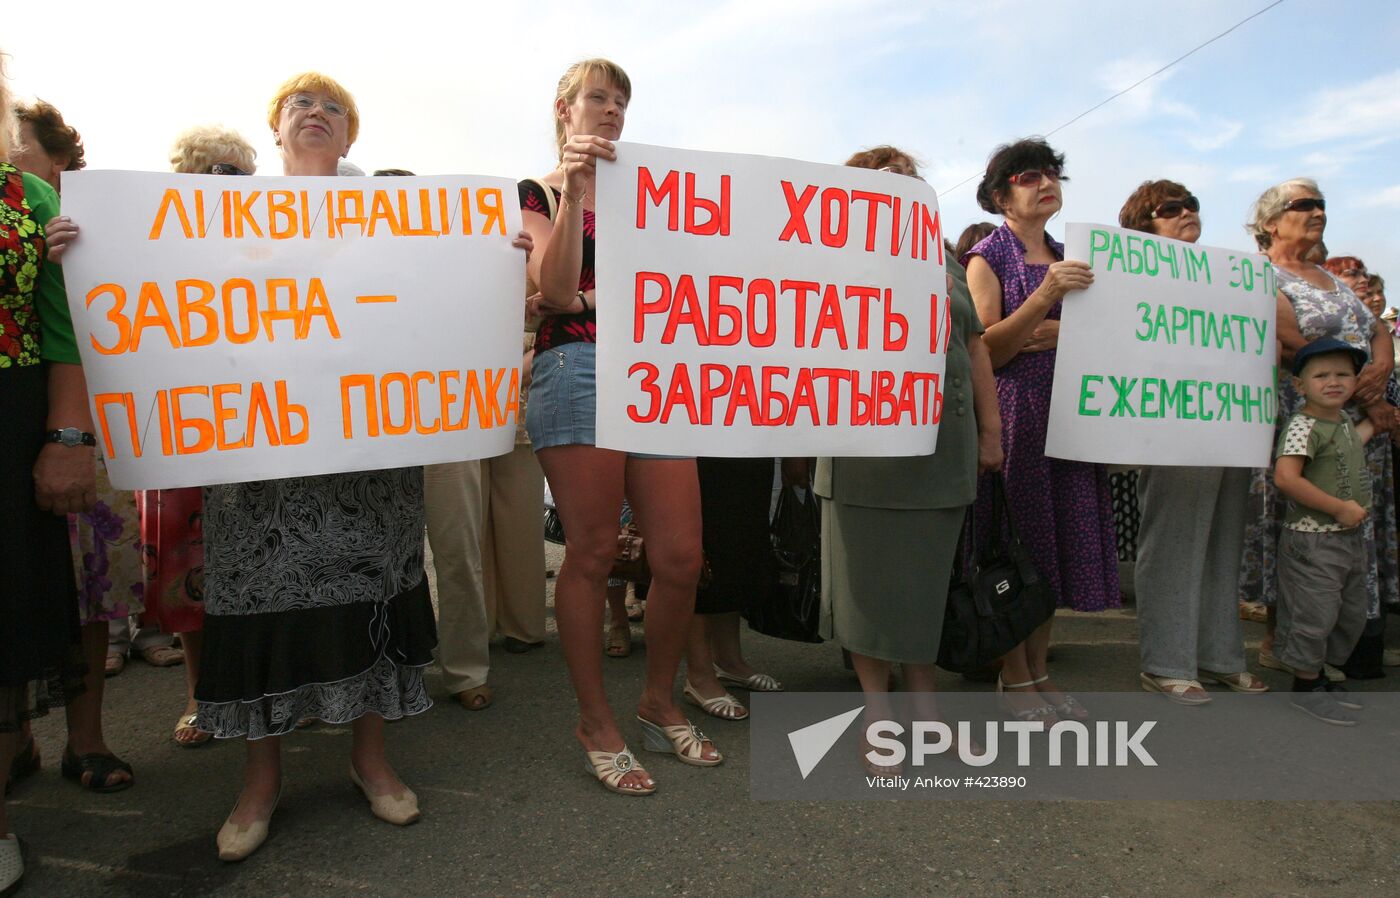 Rally to support the 30th shipyards in Primorye Region